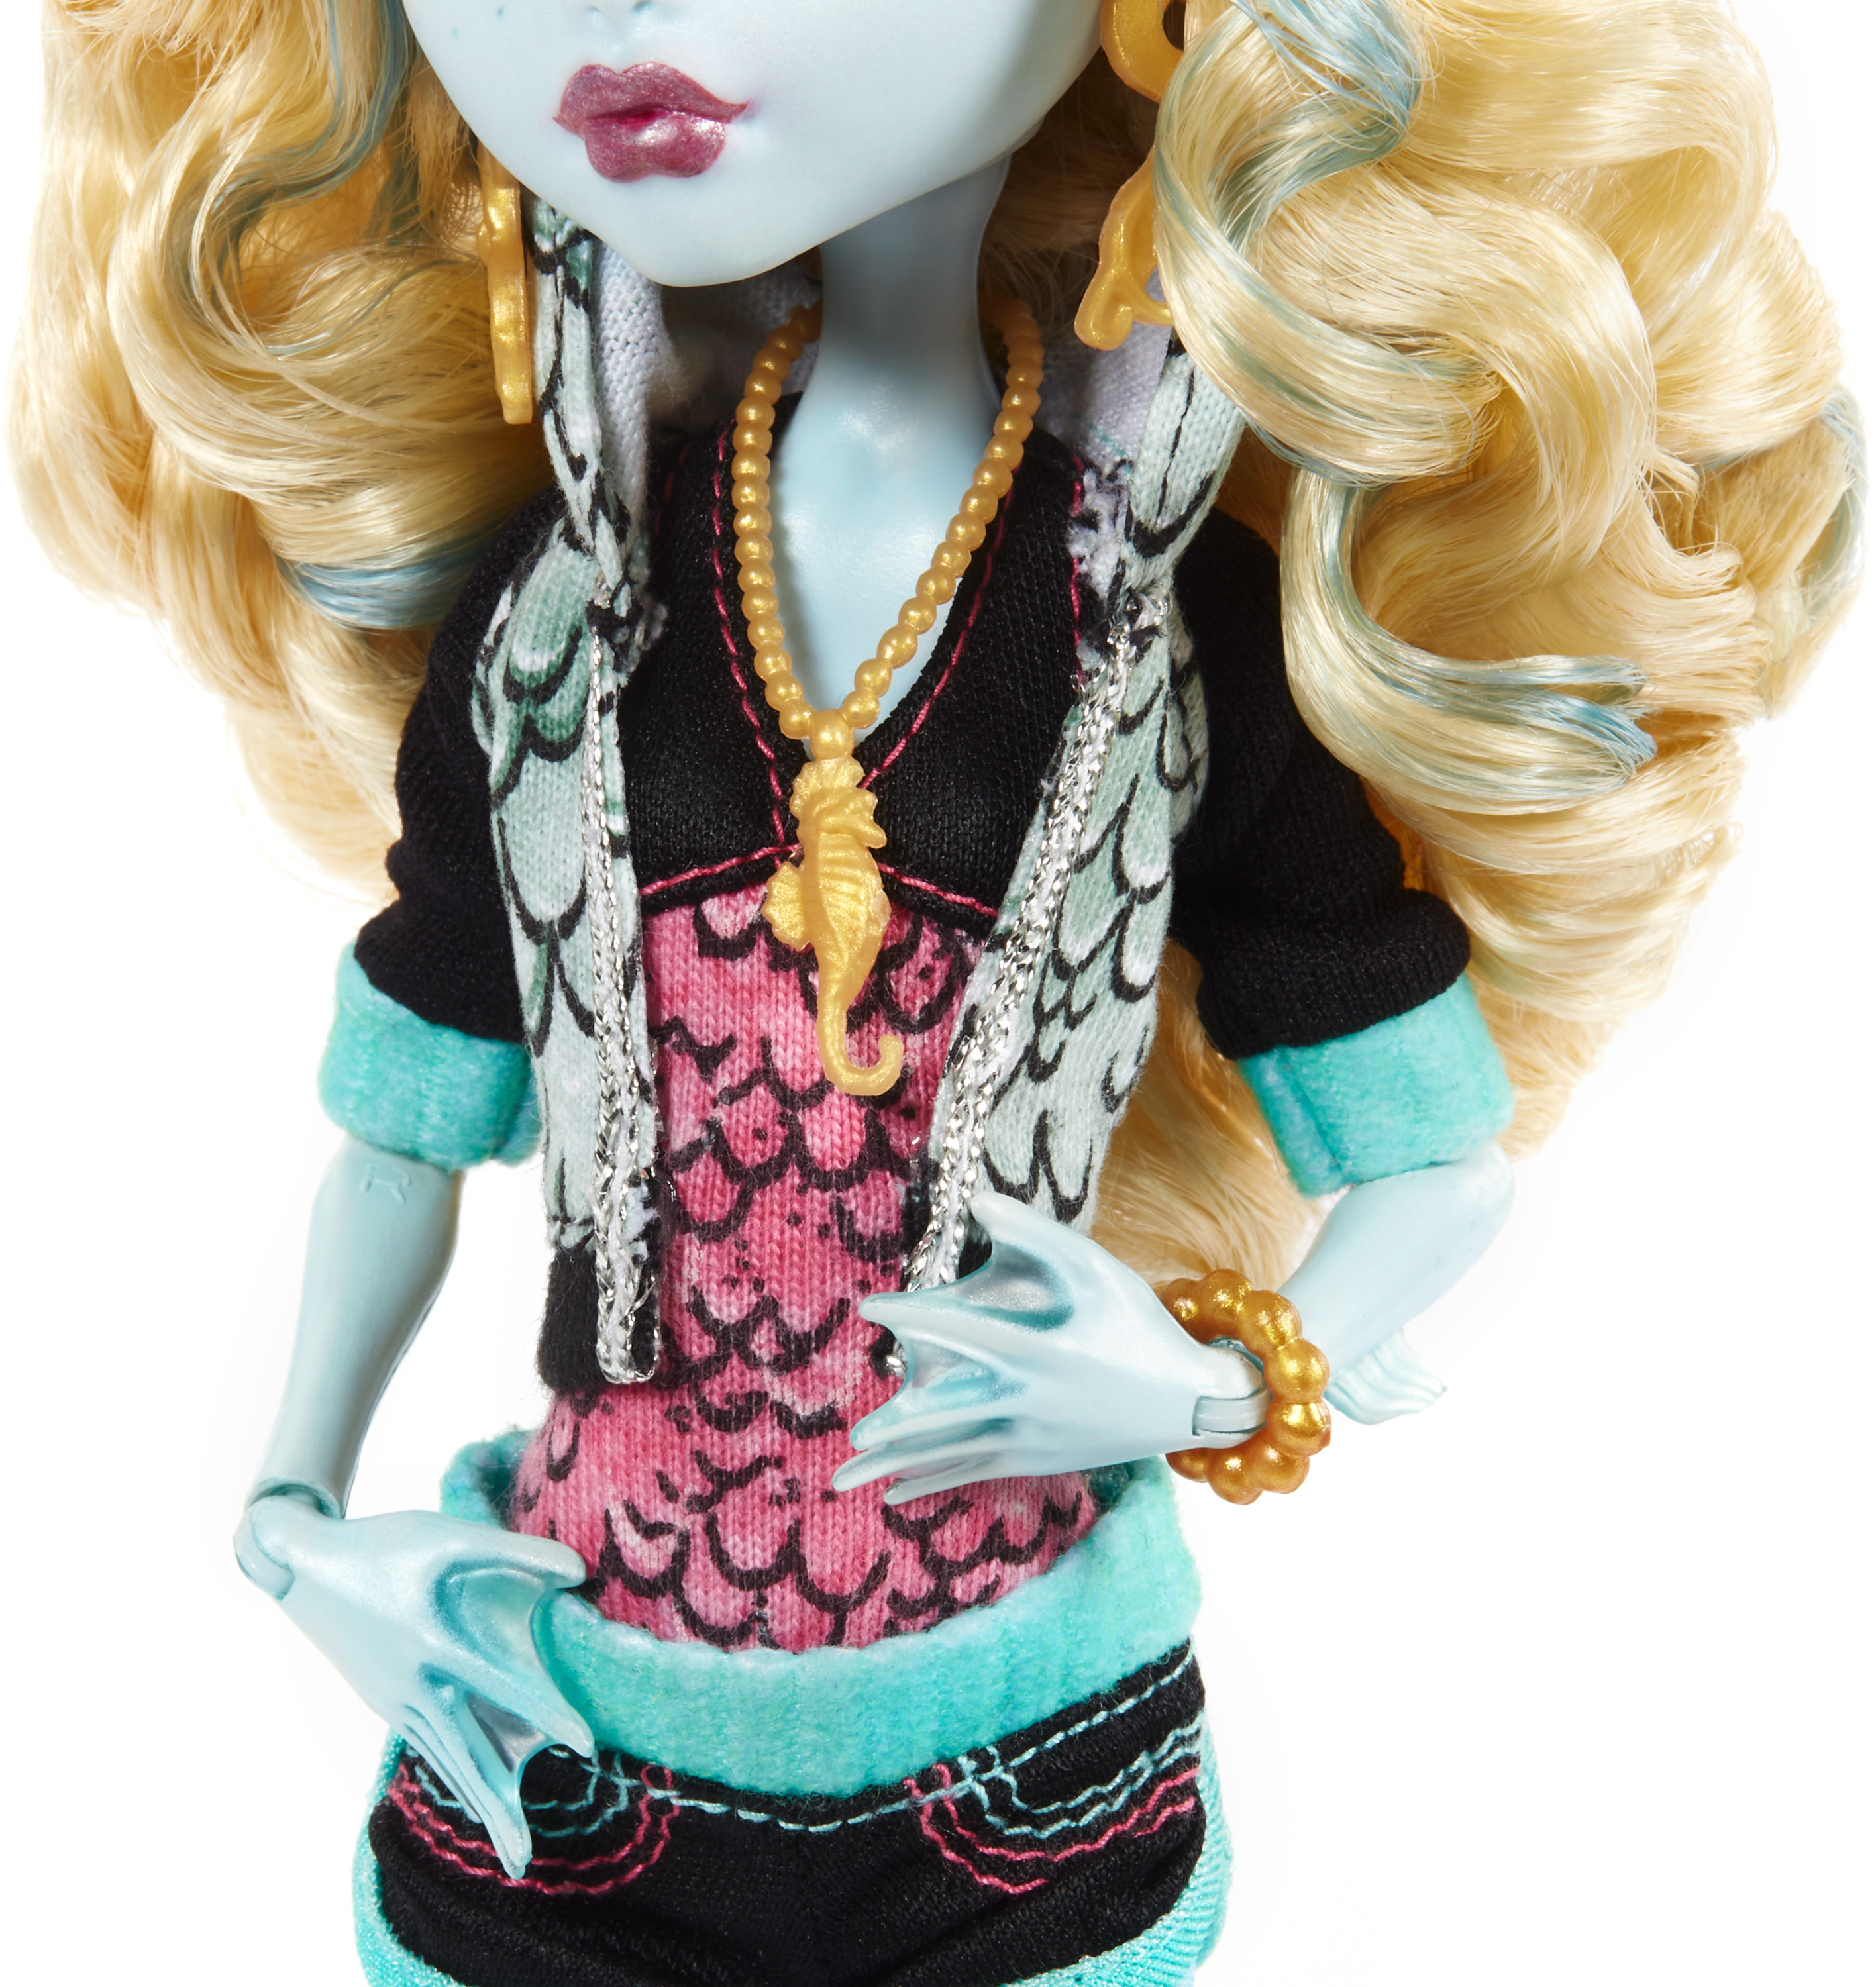 Monster High Lagoona Blue Doll, Collectible Reproduction in Original Look with Diary & Doll Stand - image 4 of 6